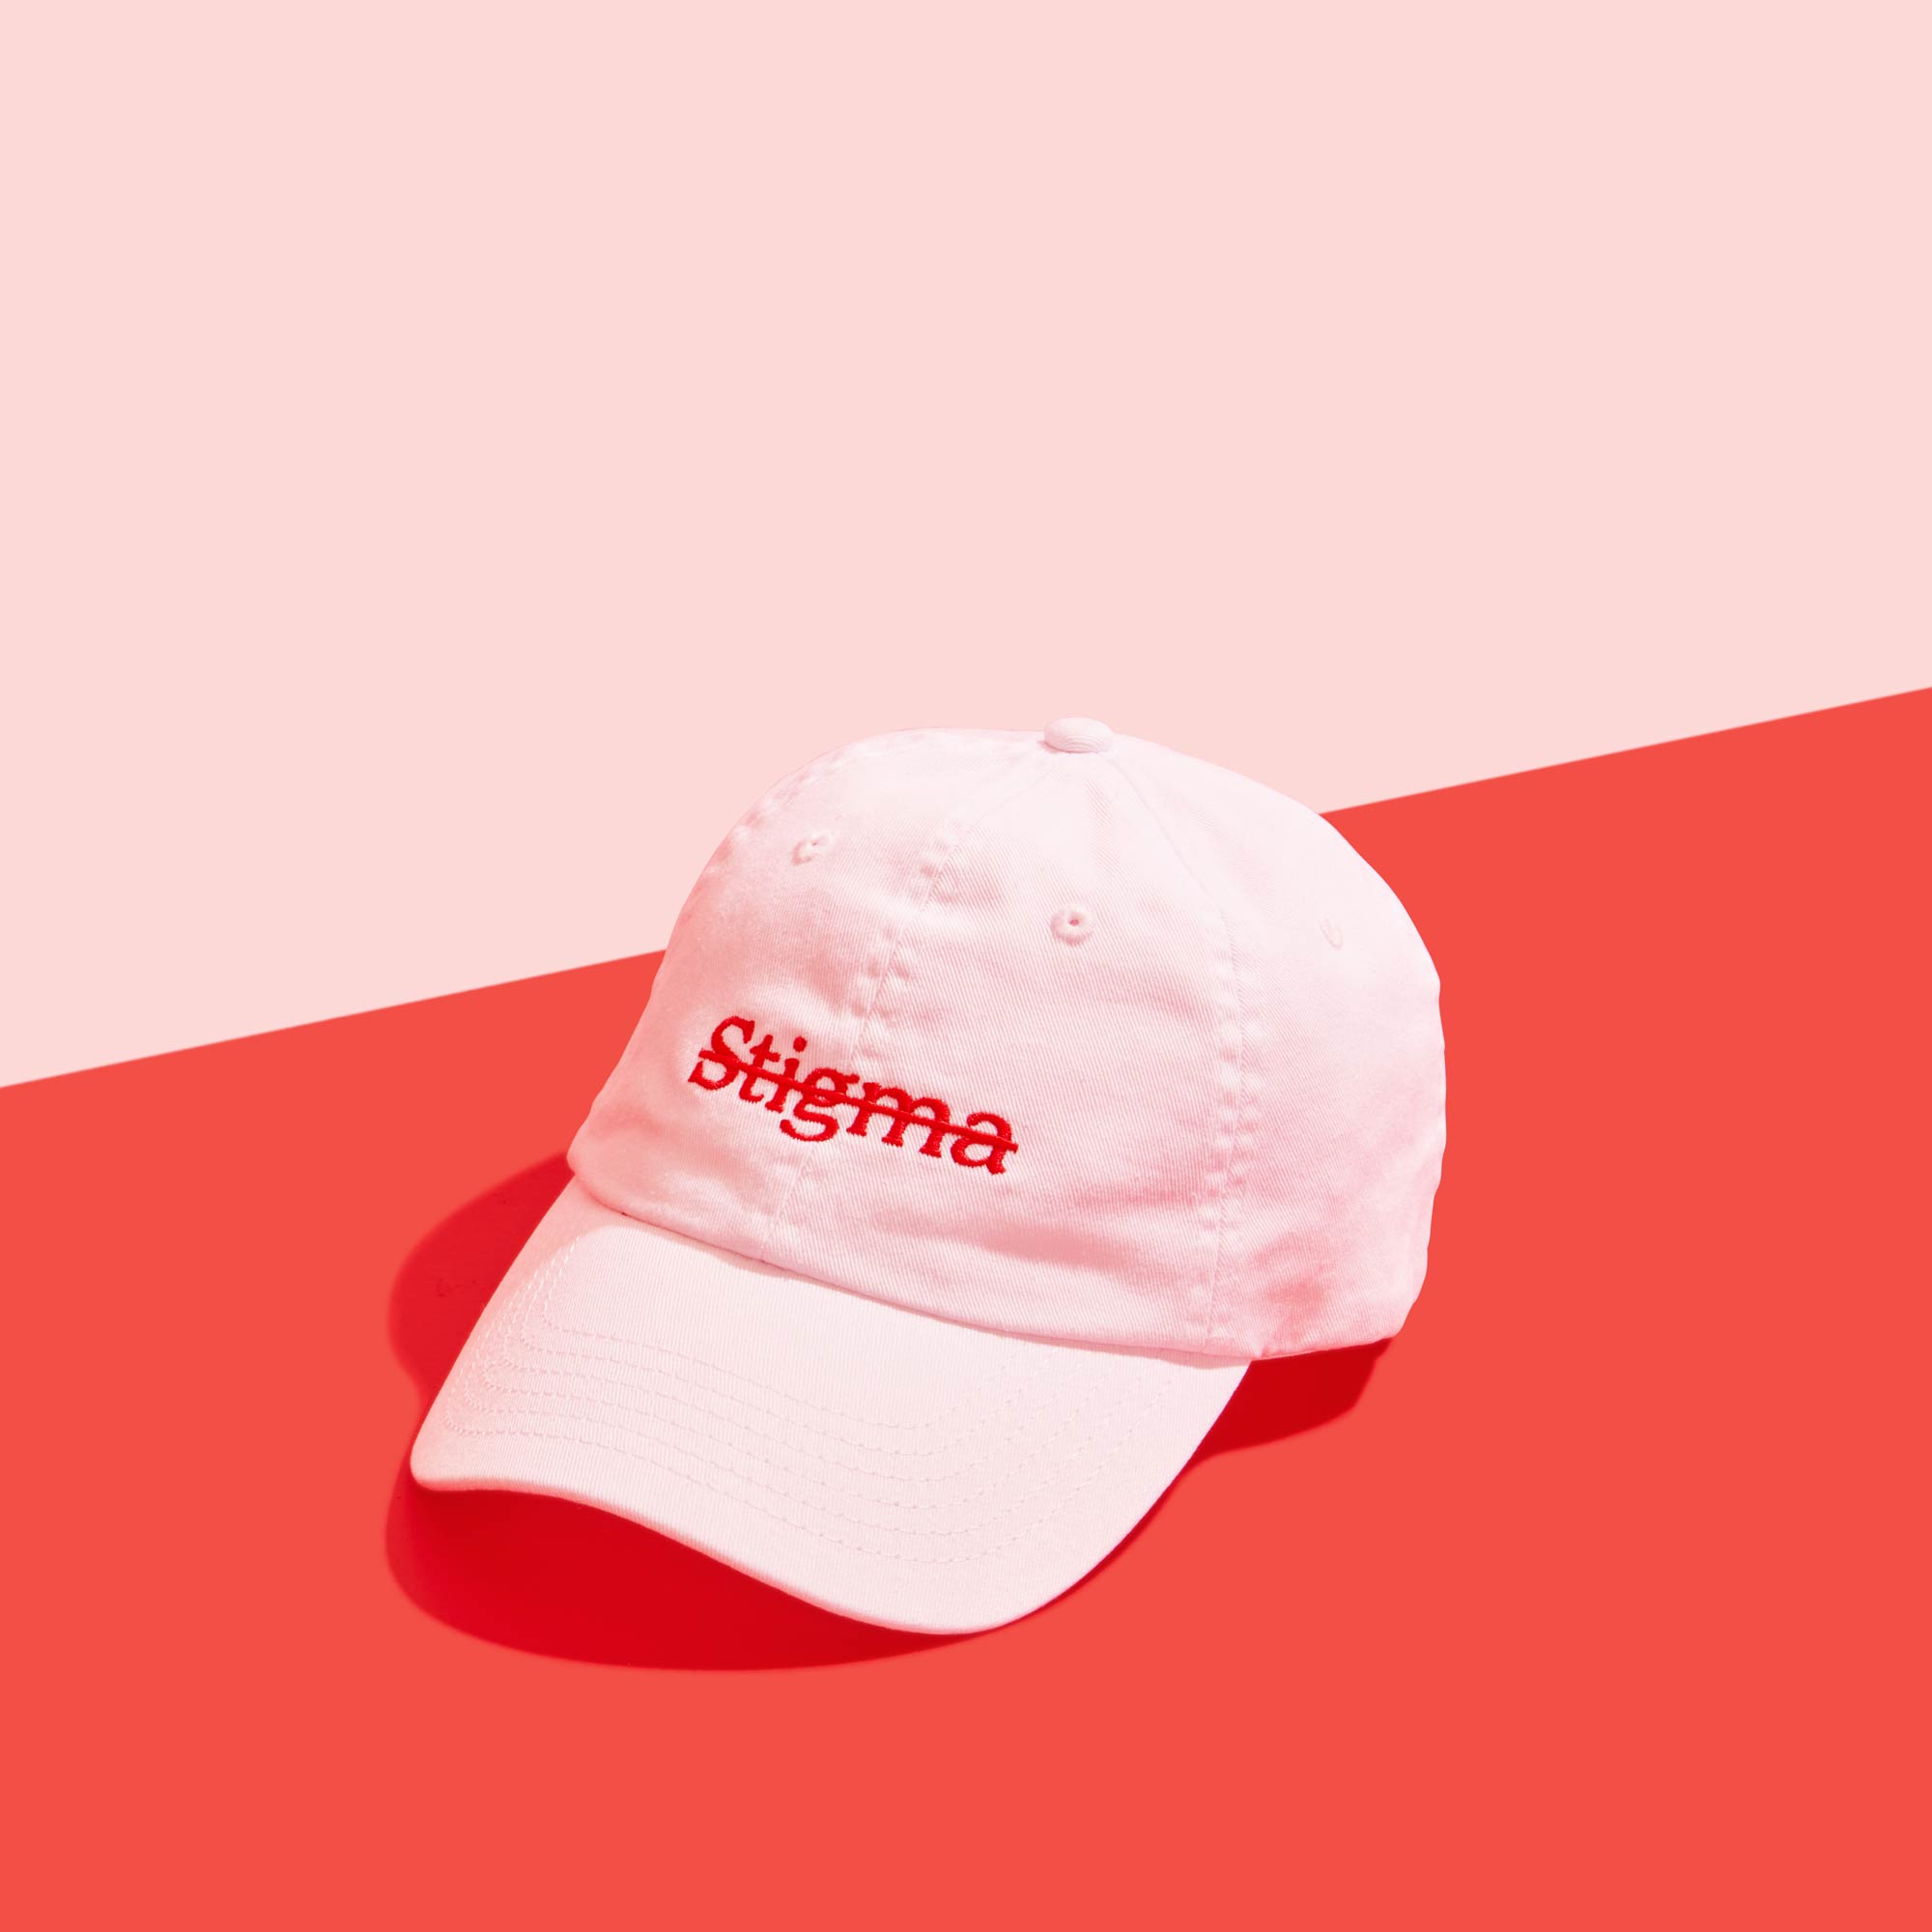 Wisp stigma hat on a pink and red background